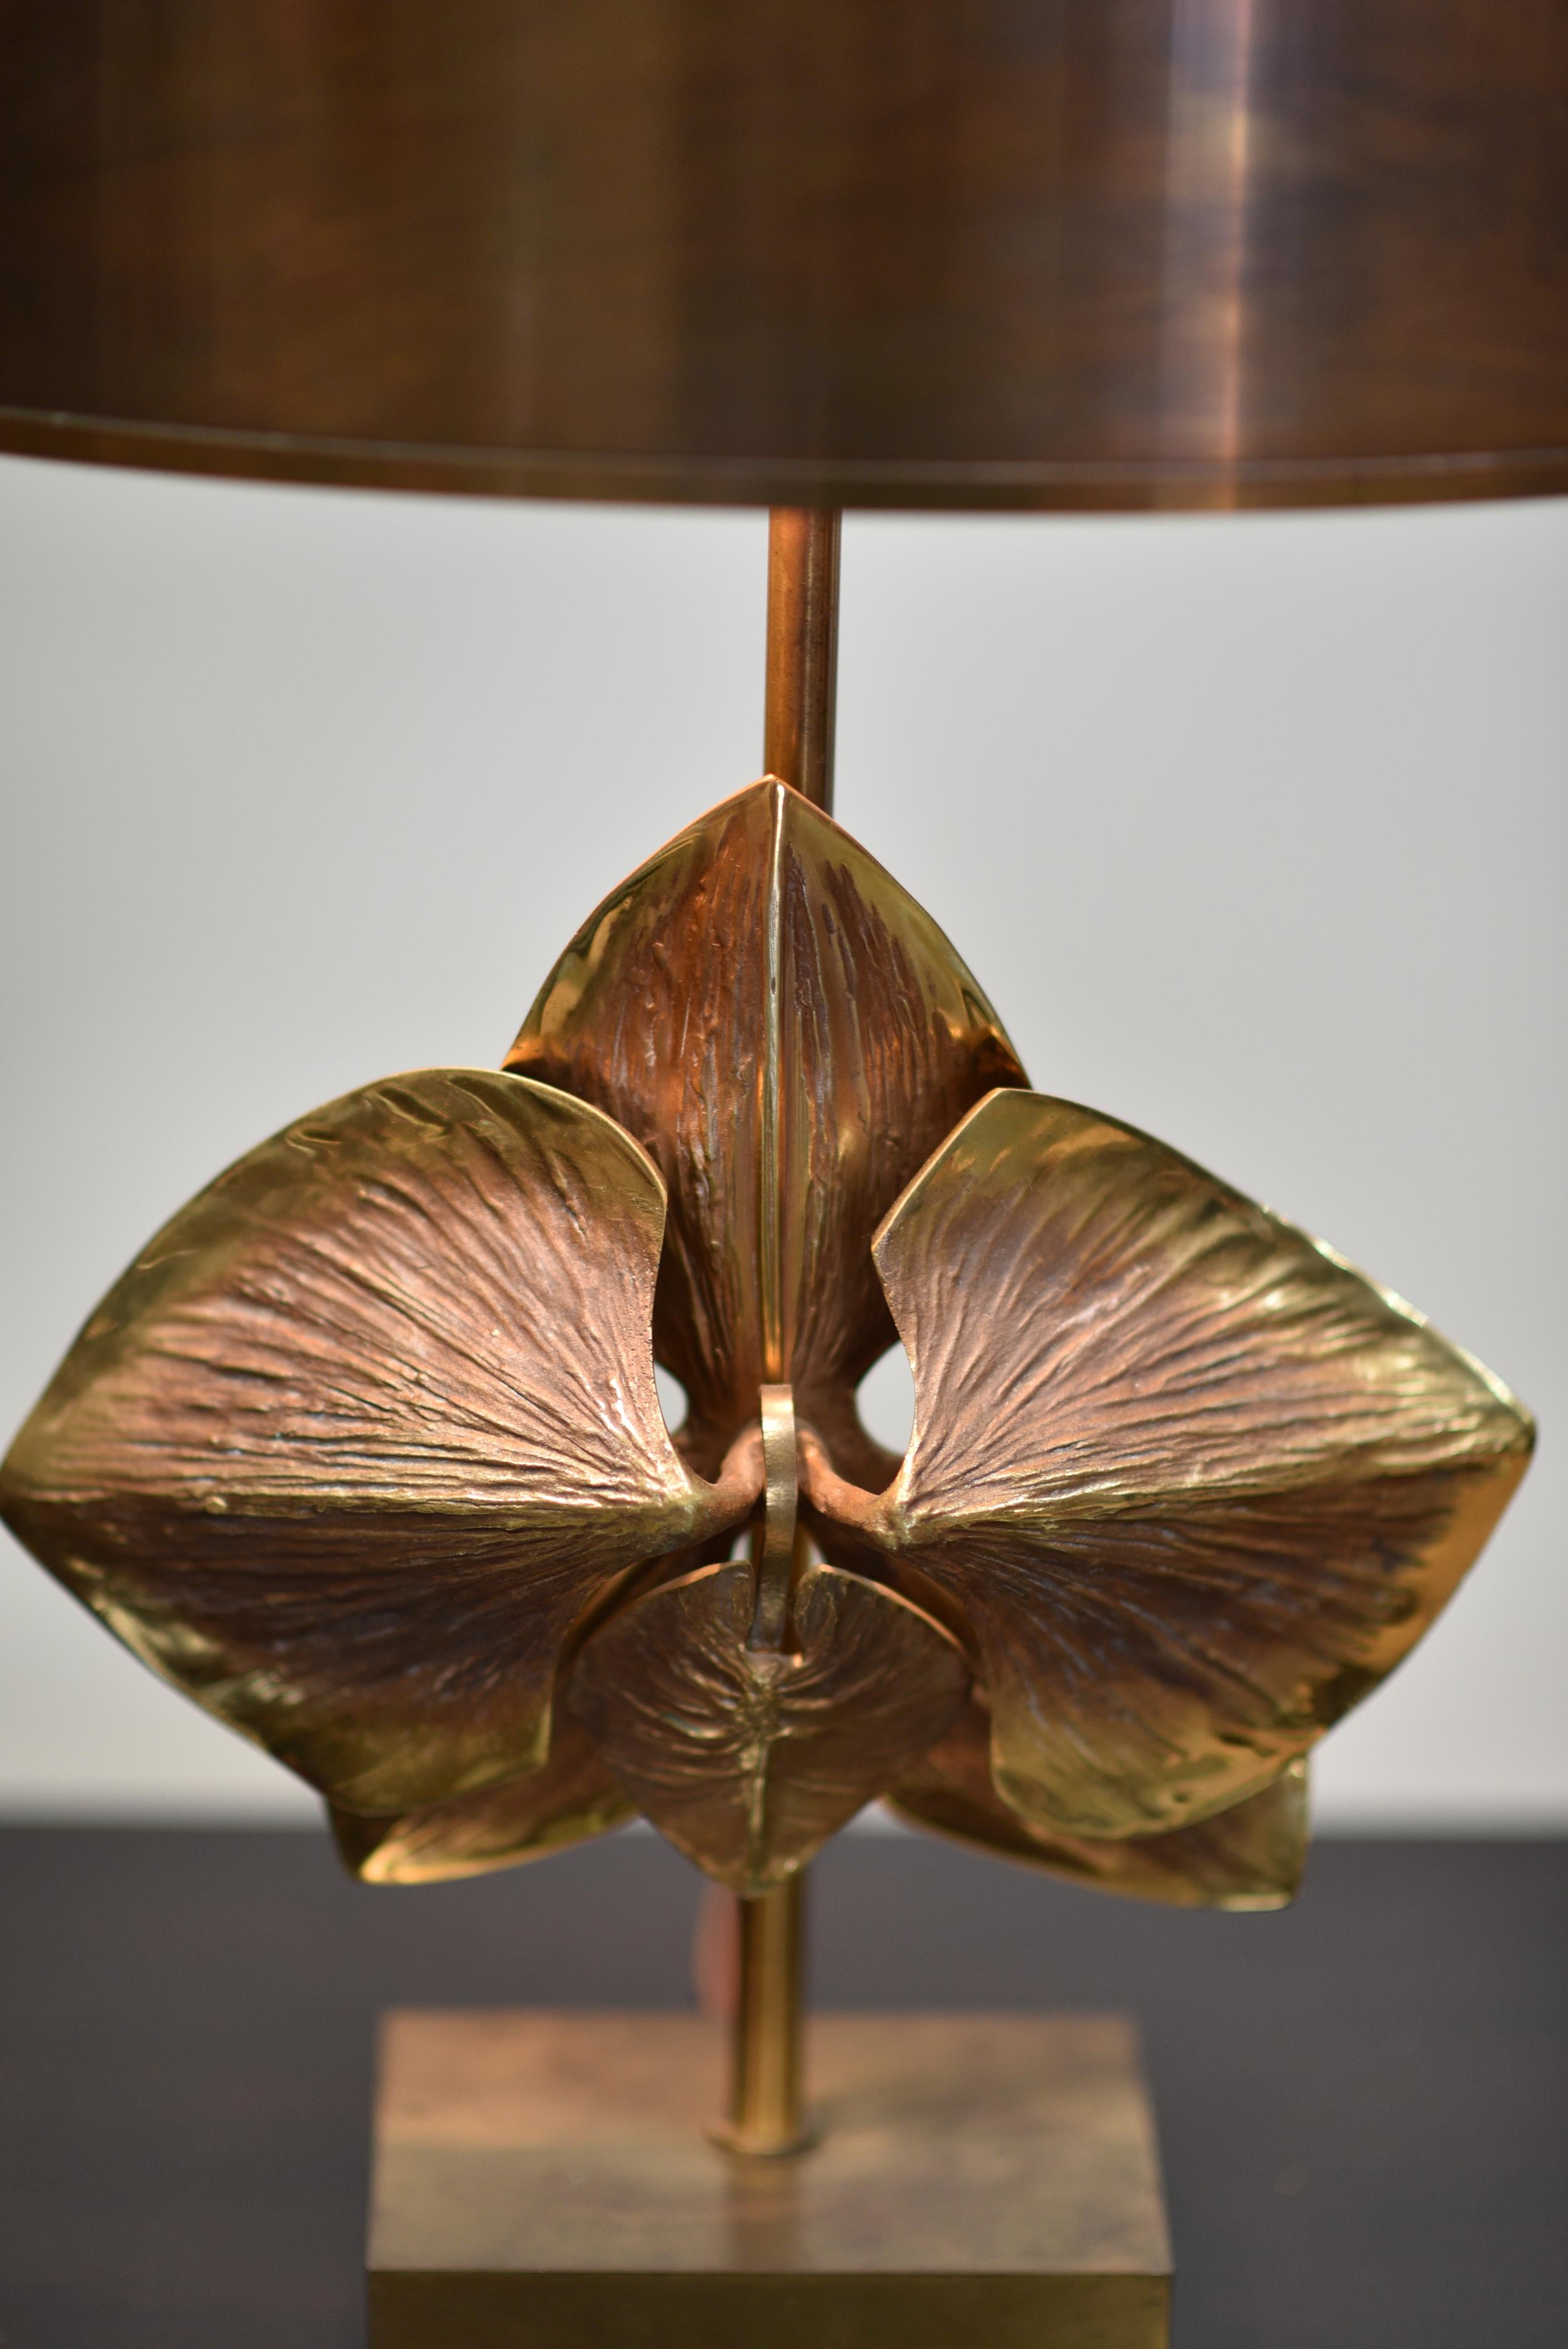 French Provincial CHARLES É FILS DESIGN BRASS Table Lamp For Sale